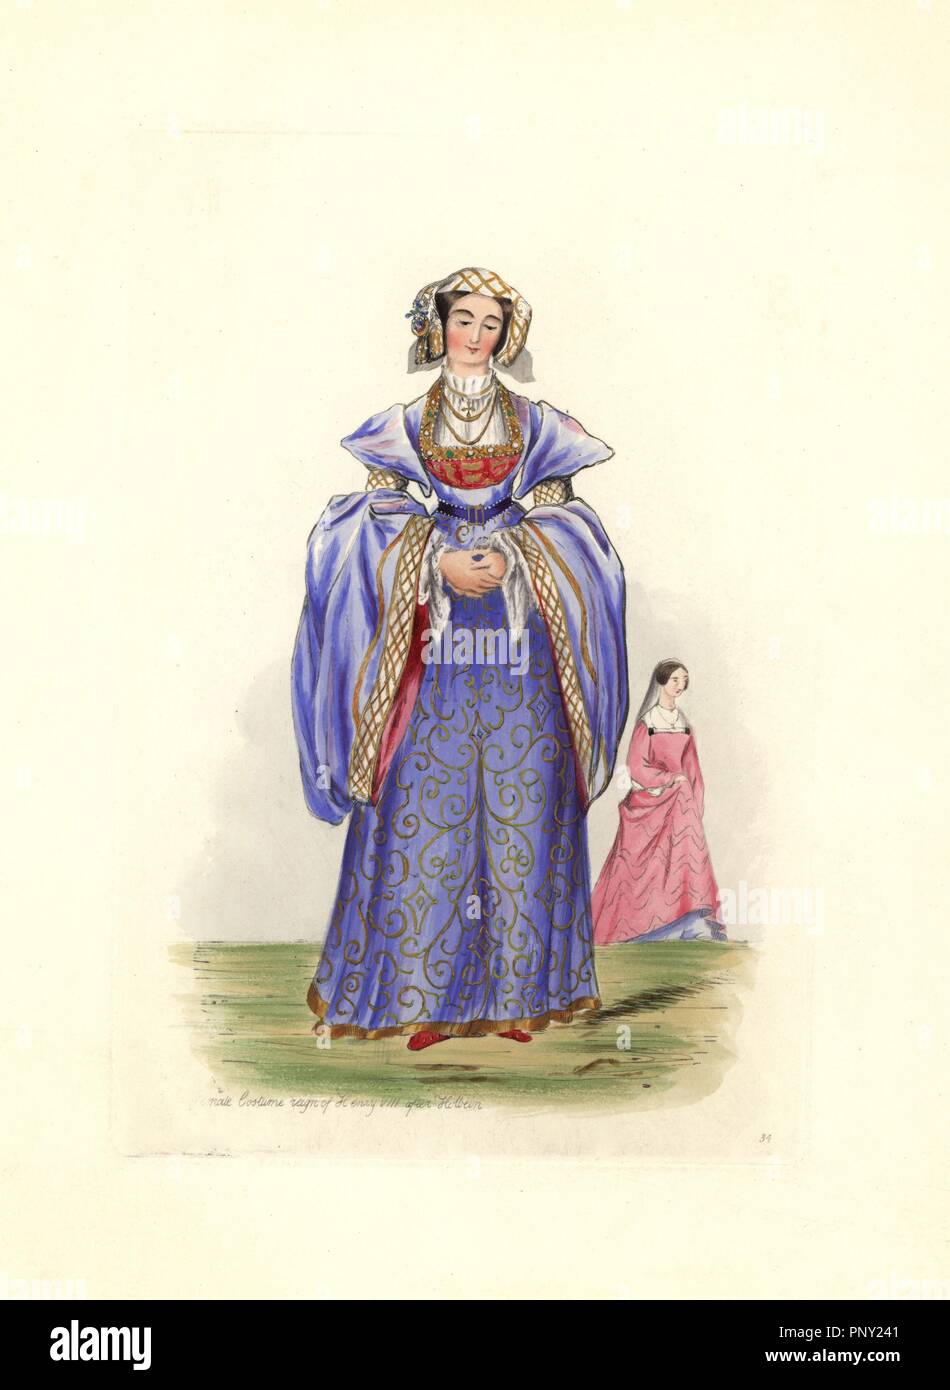 Female costume in the reign of Henry VIII after Holbein. She wears a long dress with embroidered front and large full sleeves over red shoes. Handcolored engraving from "Civil Costume of England from the Conquest to the Present Period" drawn by Charles Martin and etched by Leopold Martin, London, Henry Bohn, 1842. The costumes were drawn from tapestries, monumental effigies, illuminated manuscripts and portraits. Charles and Leopold Martin were the sons of the romantic artist and mezzotint engraver John Martin (1789-1854). Stock Photo